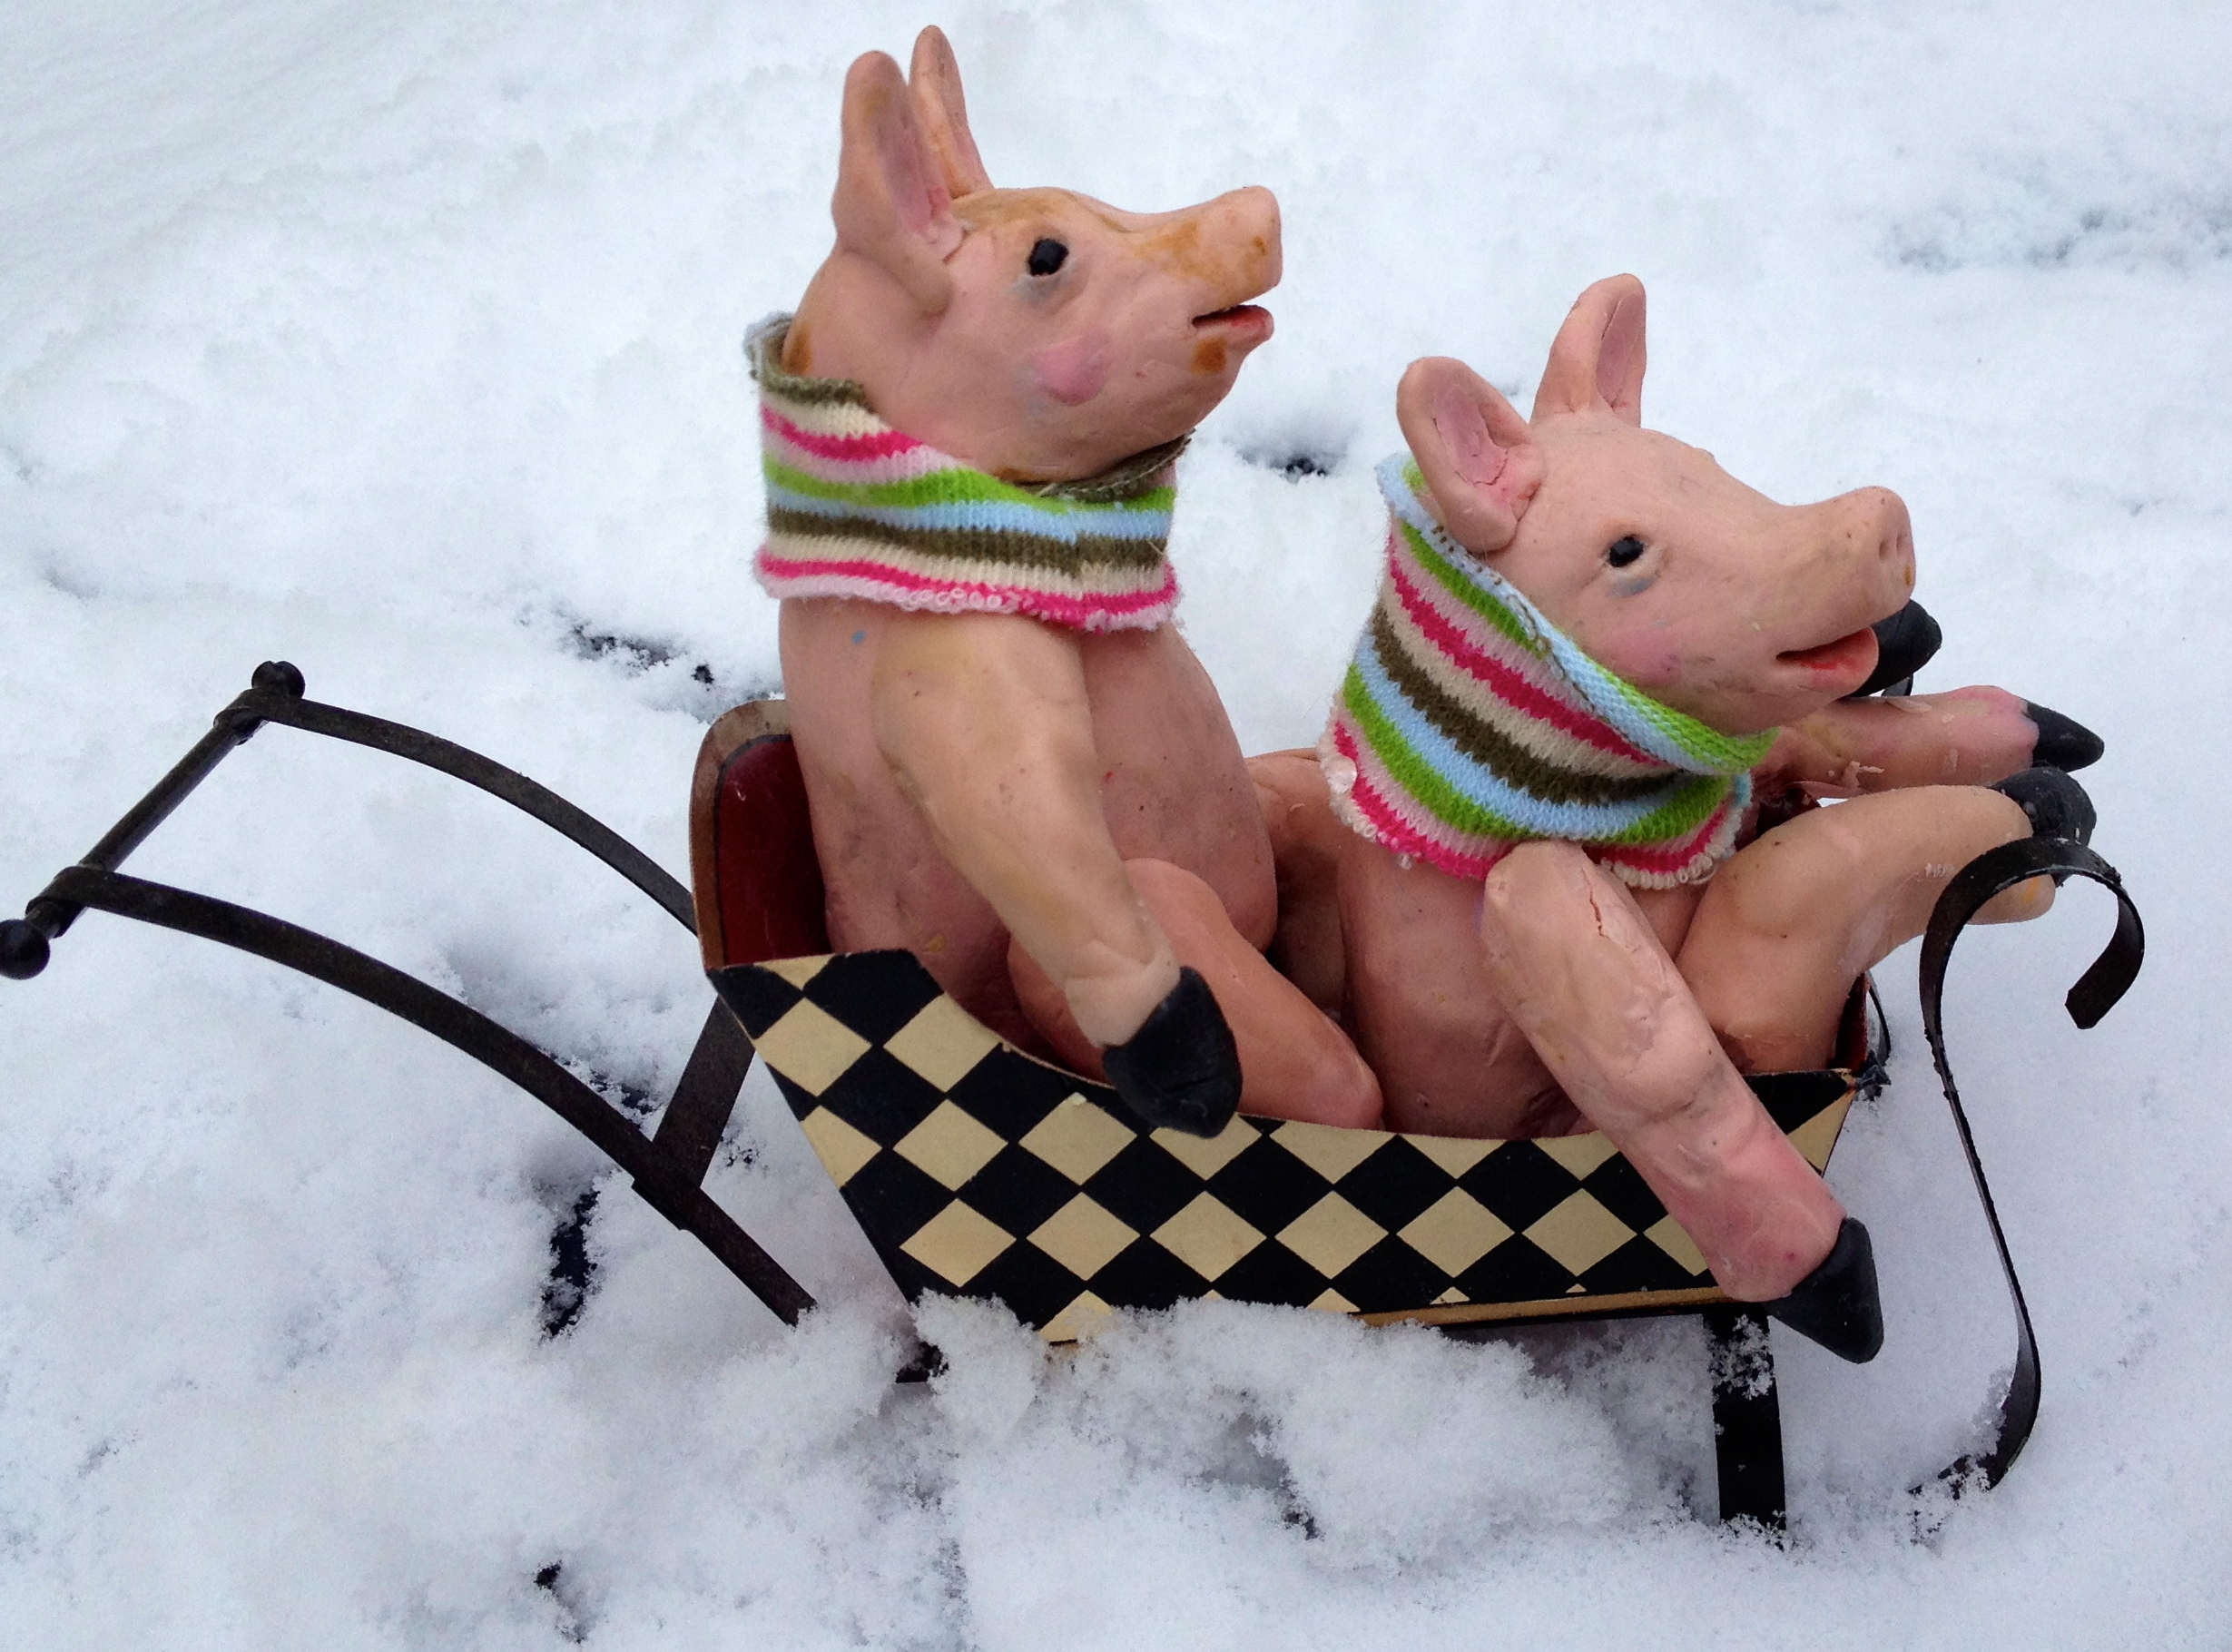 pigs in sleds